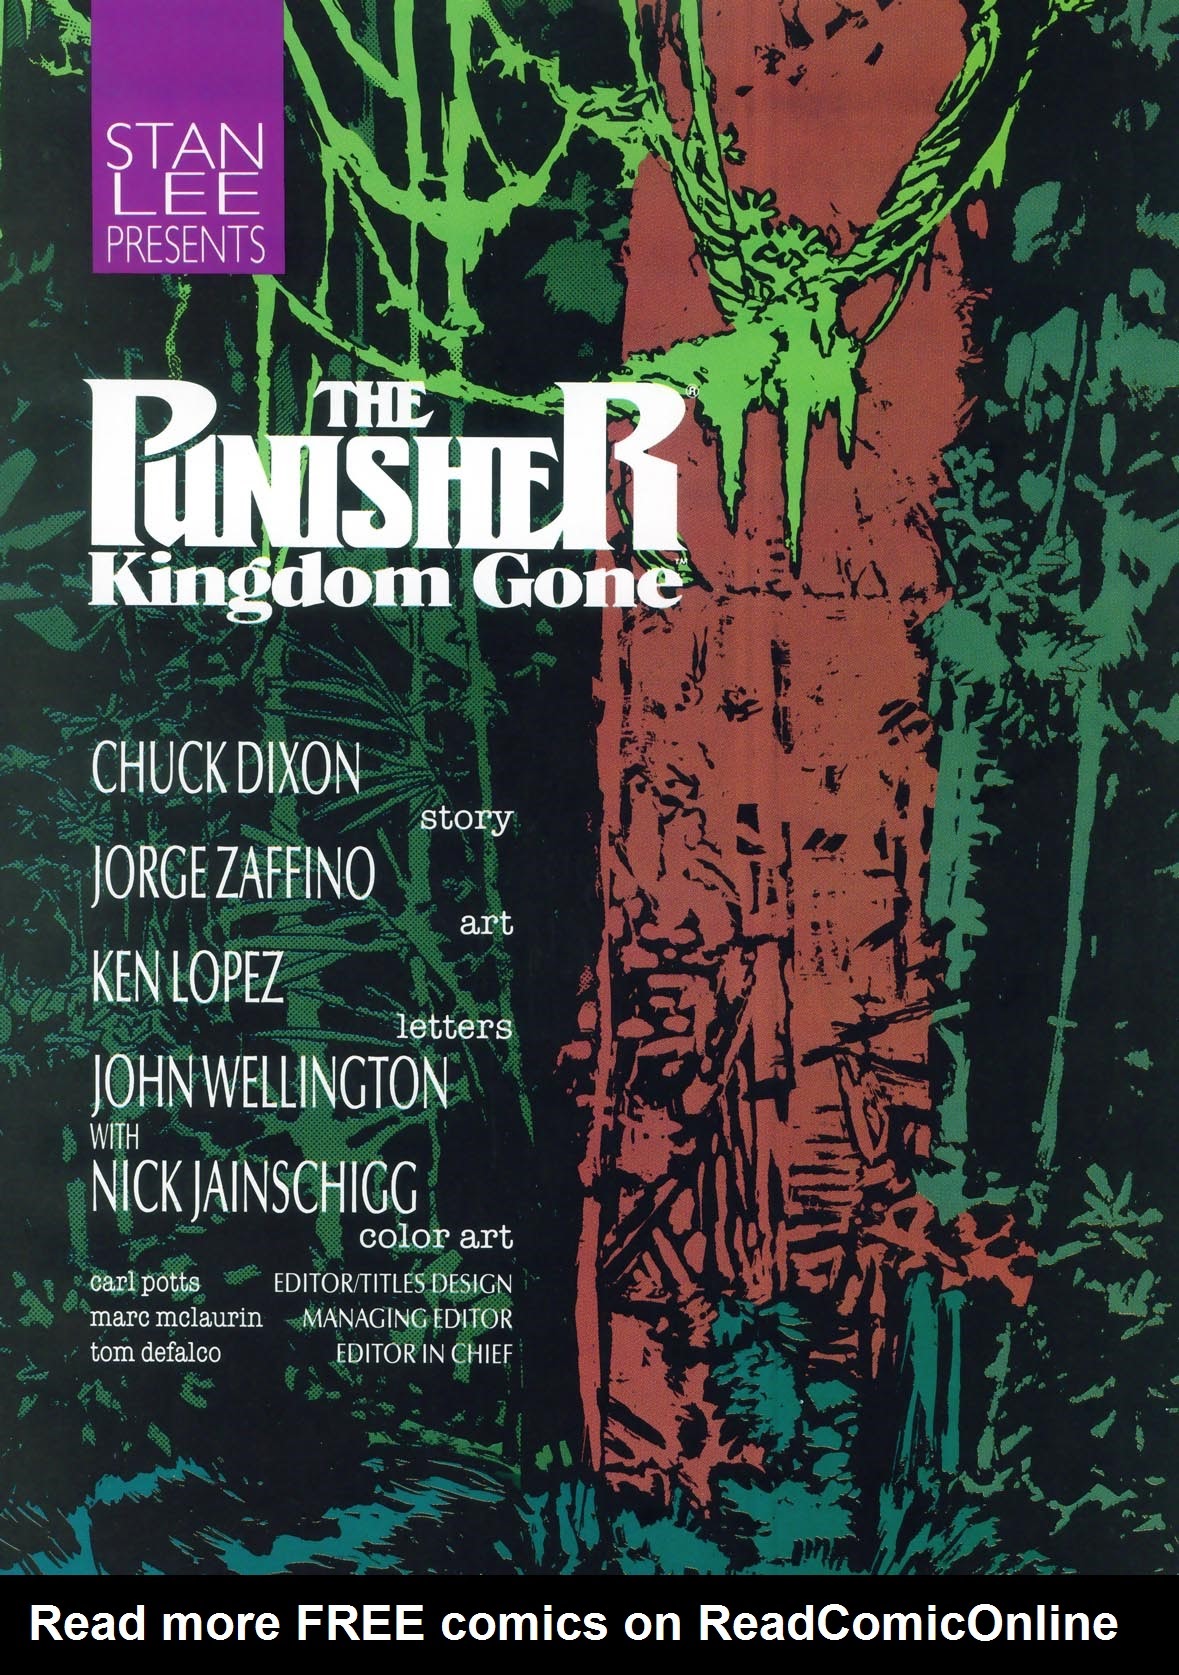 Read online The Punisher, Kingdom Gone comic -  Issue # Full - 6